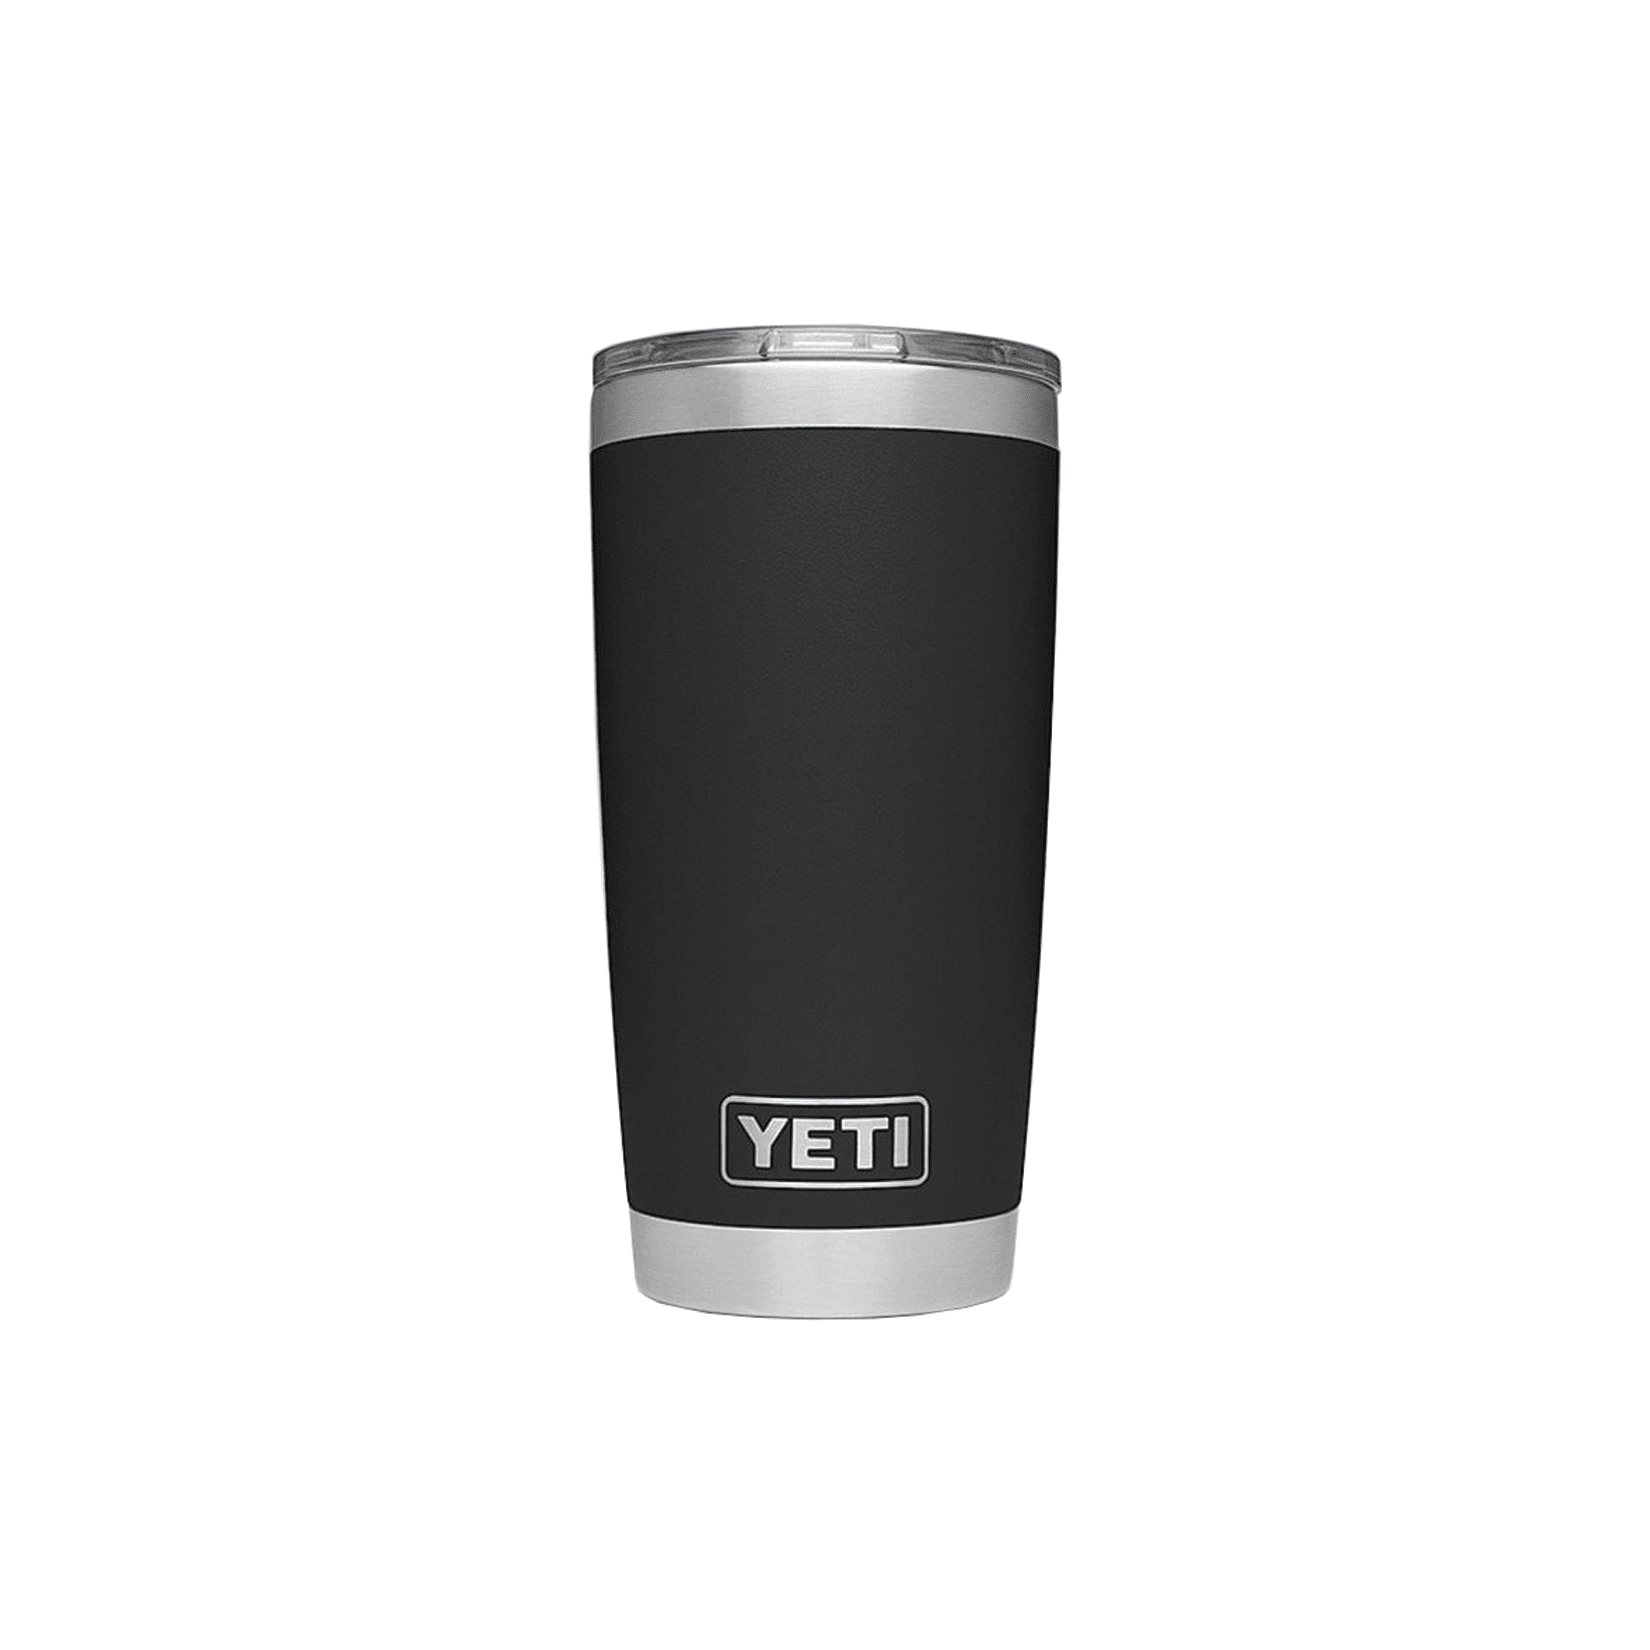 https://image.fisheriessupply.com/c_lpad,dpr_3.0,w_550,h_550,d_imageComingSoon-tiff/f_auto,q_auto/v1/static-images/yeti-coolers-rambler-20-oz-stainless-steel-insulated-tumbler-5-duracoat-colors-black